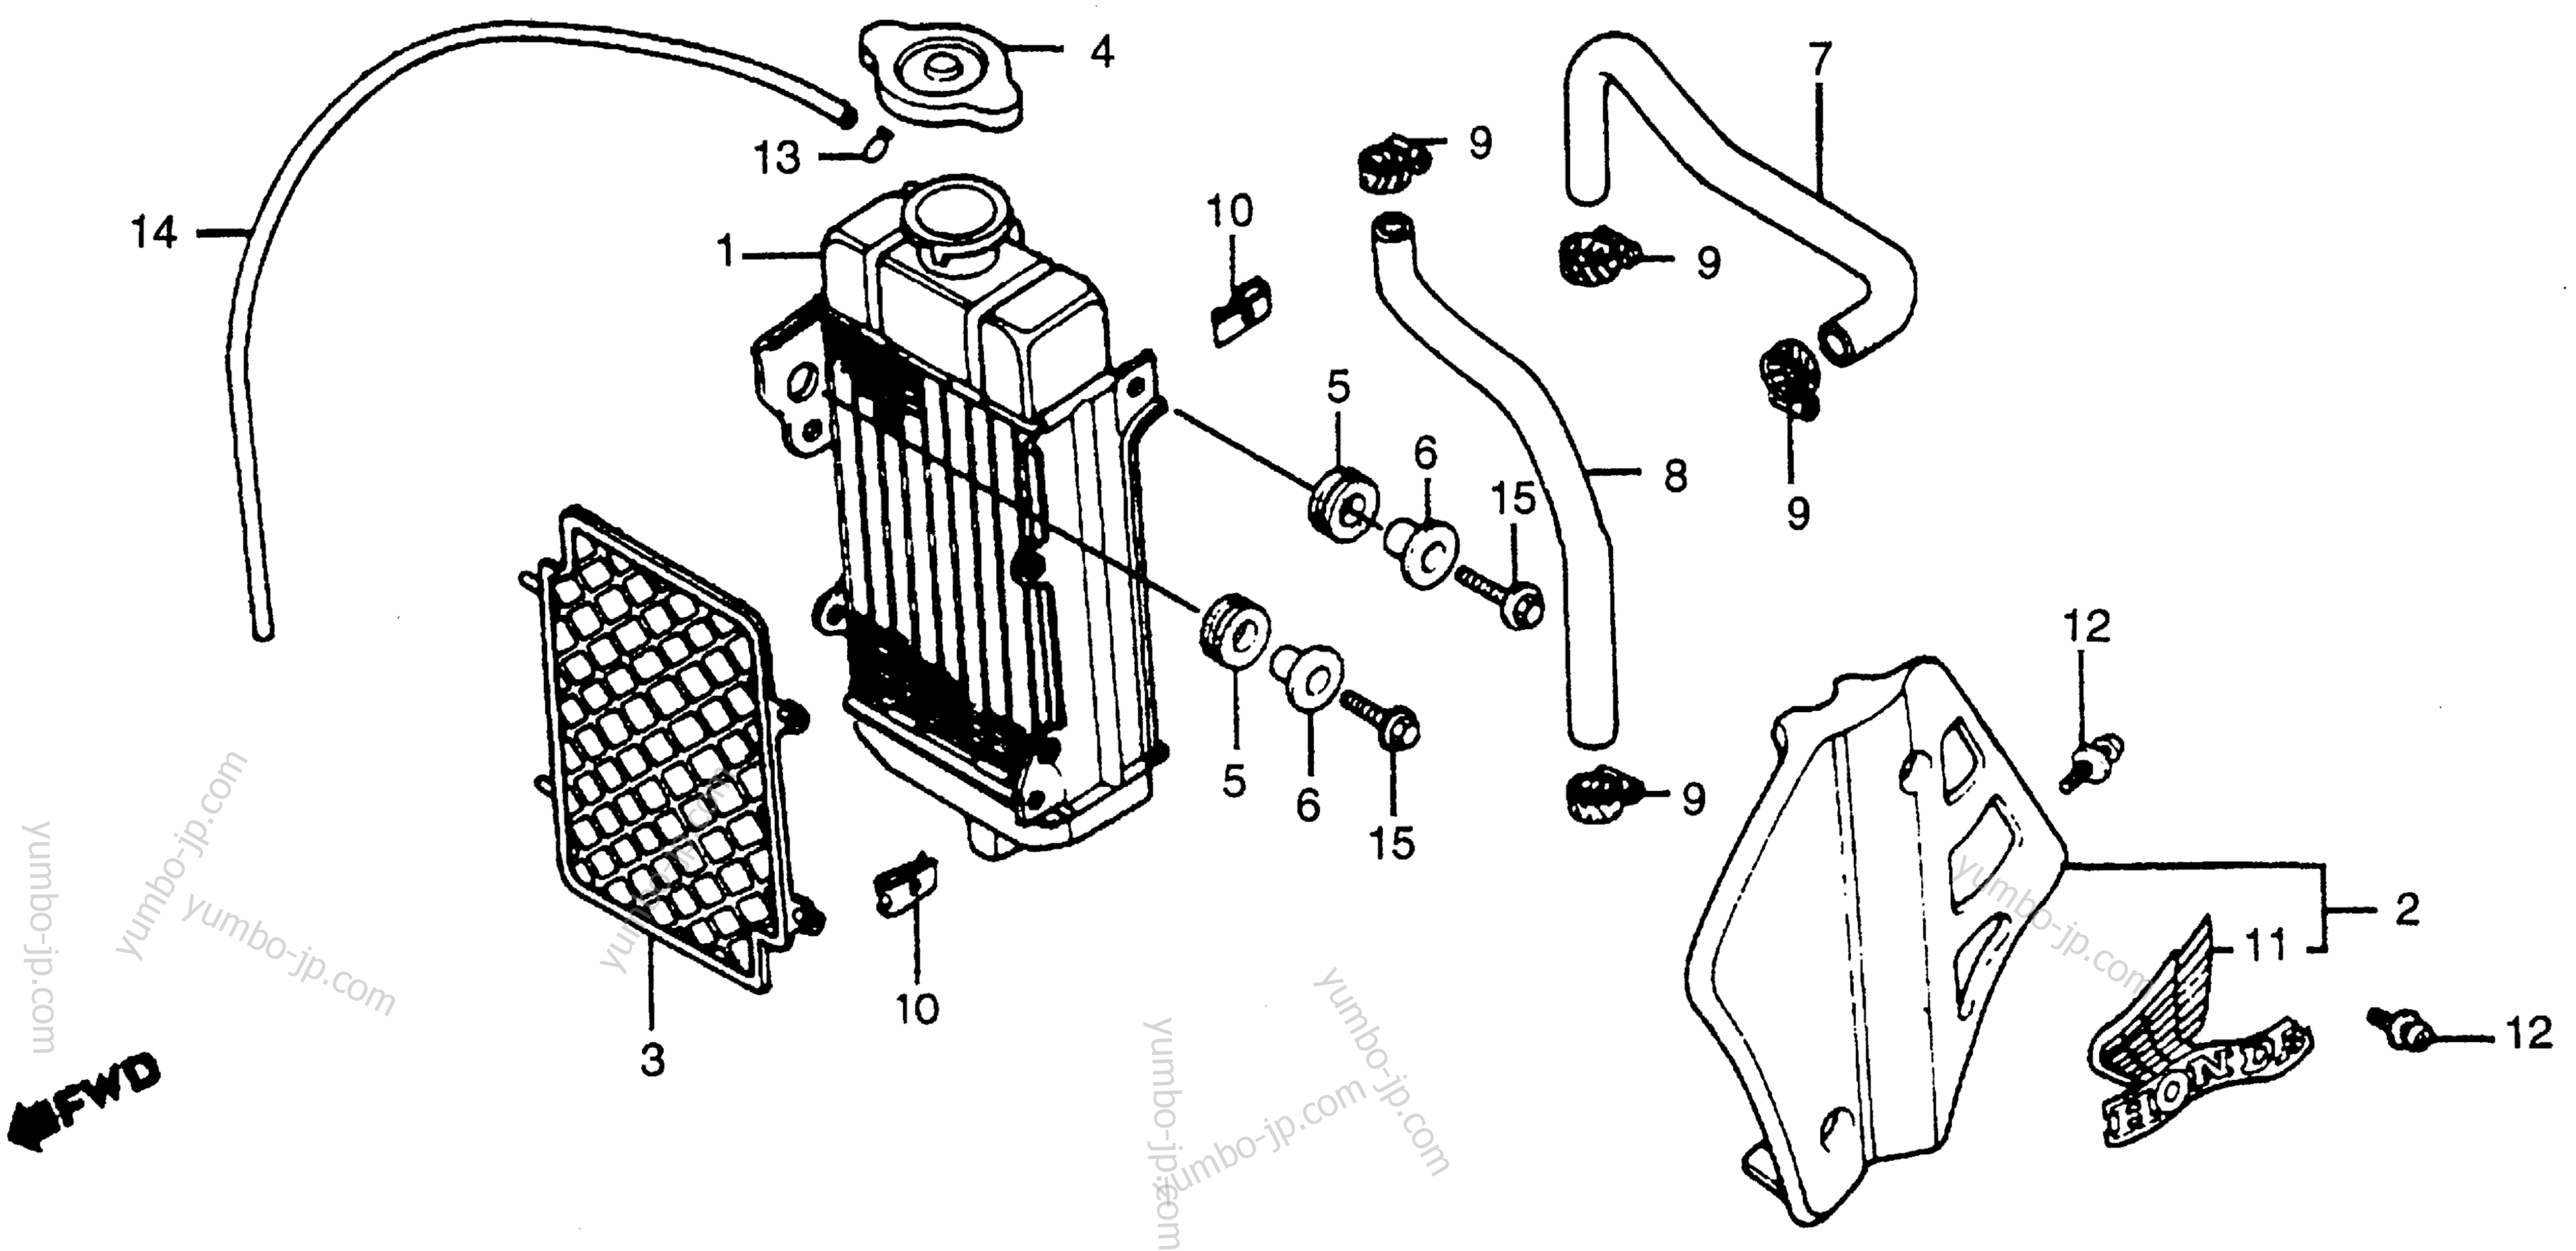 RADIATOR for motorcycles HONDA CR80R A 1984 year